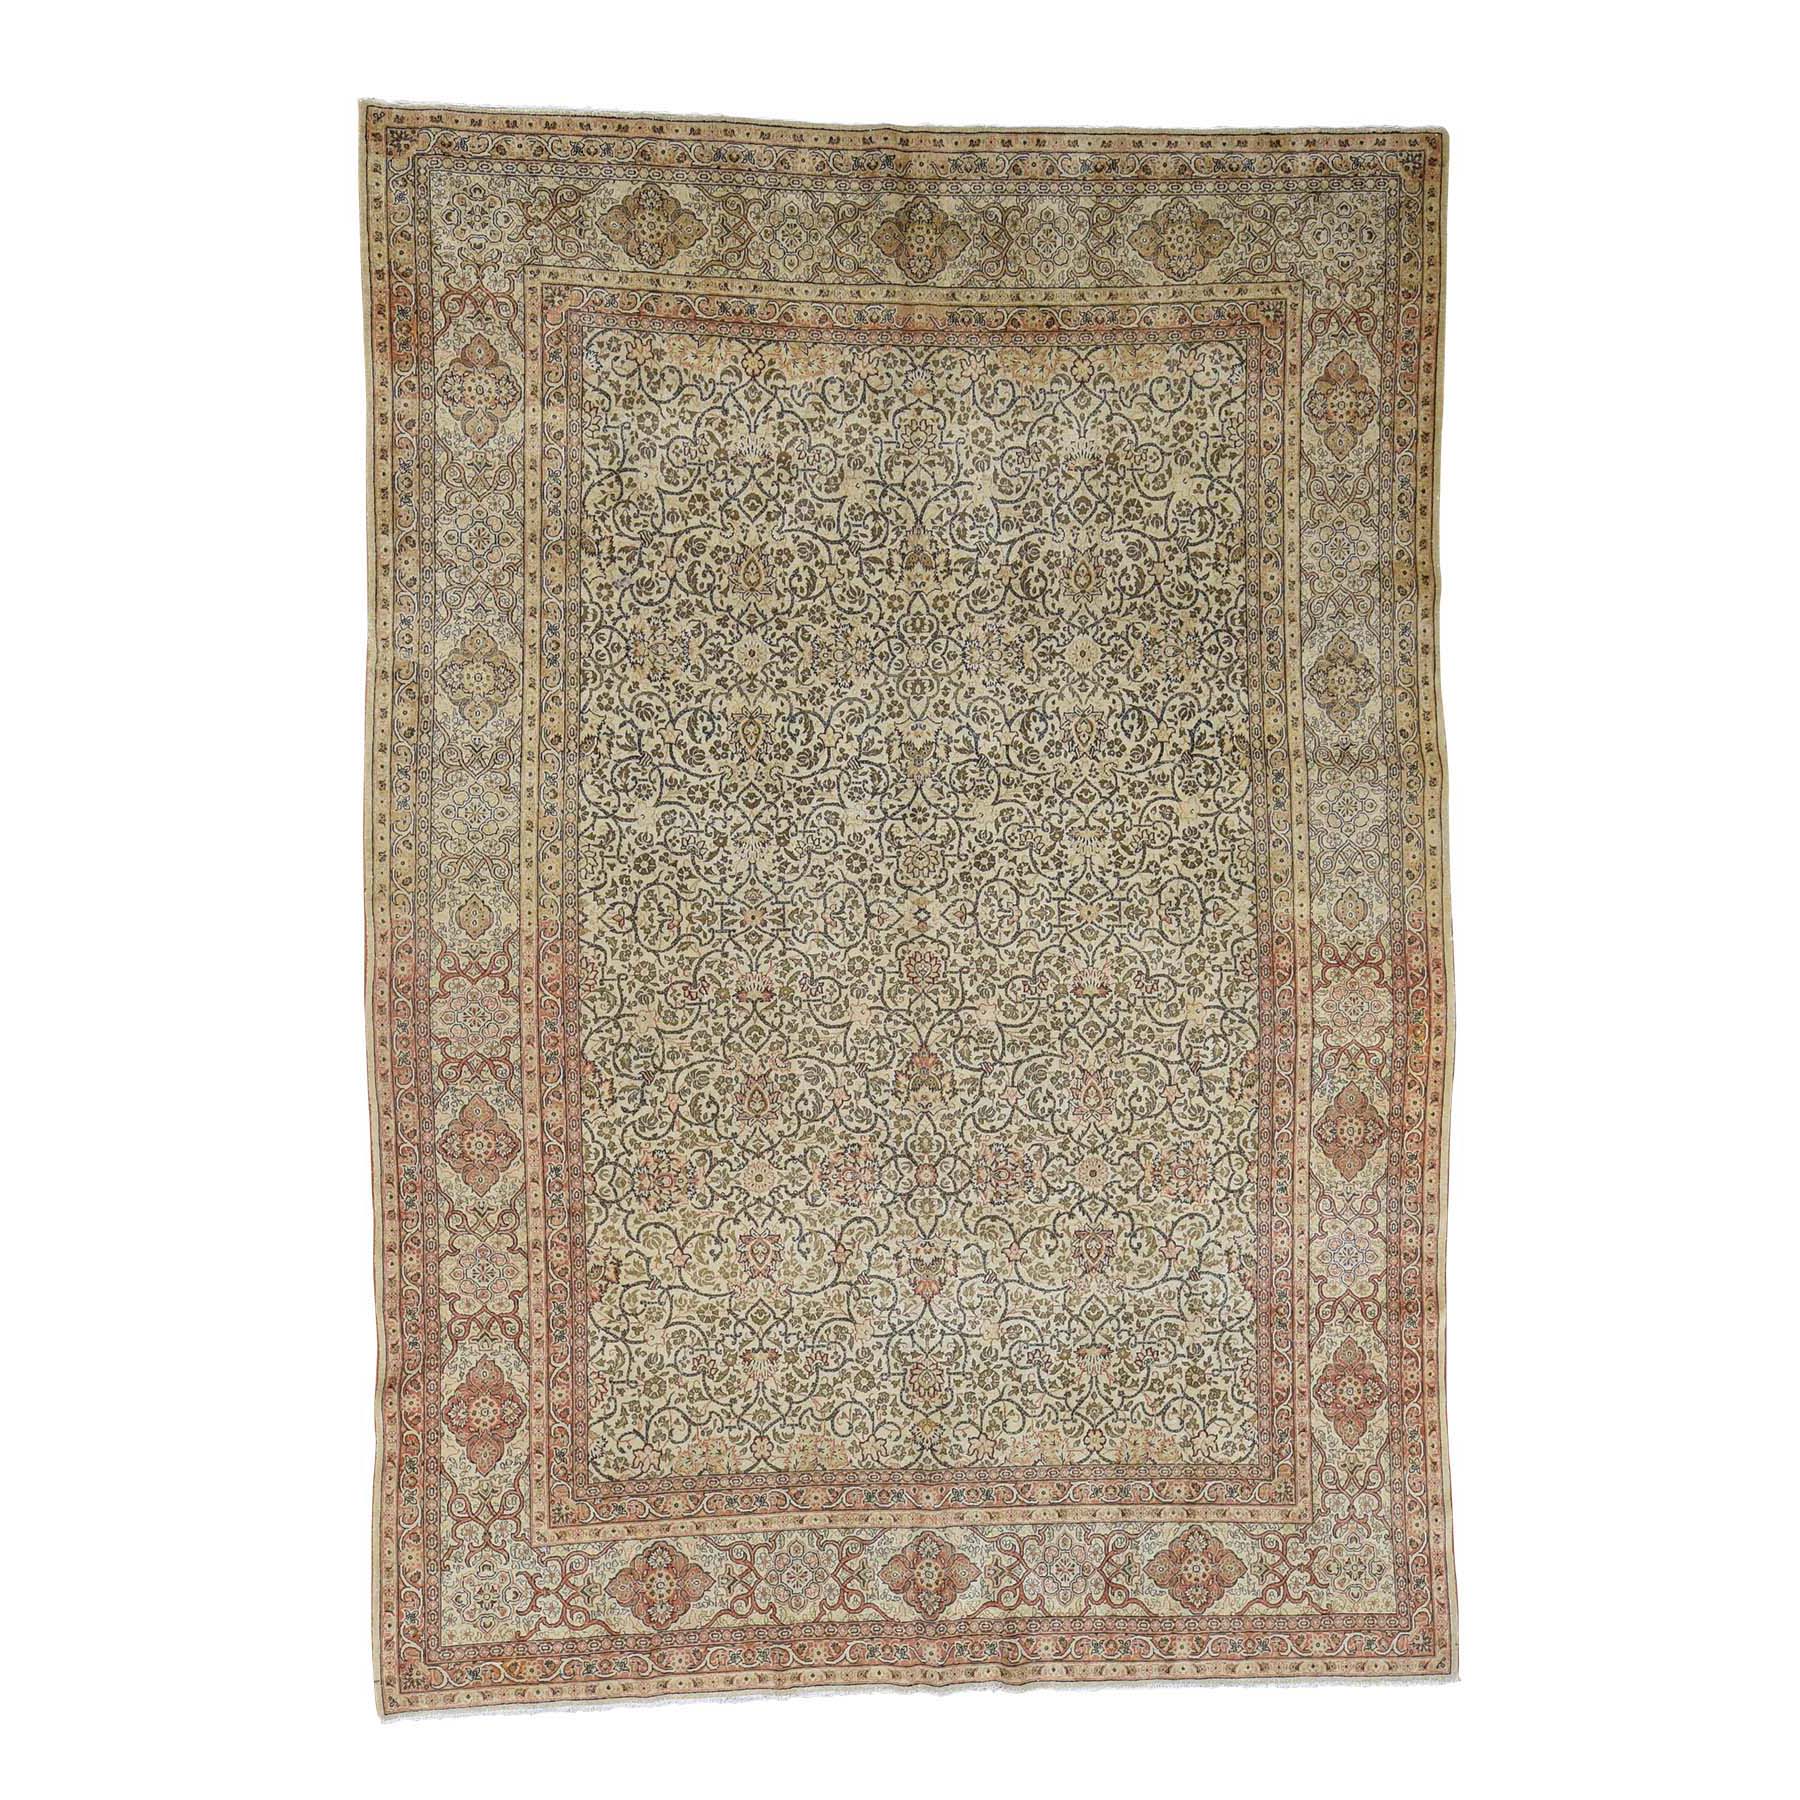 8'6"x12'1" Antique Persian Tabriz Hand Woven Pure Wool Full Pile Rug 